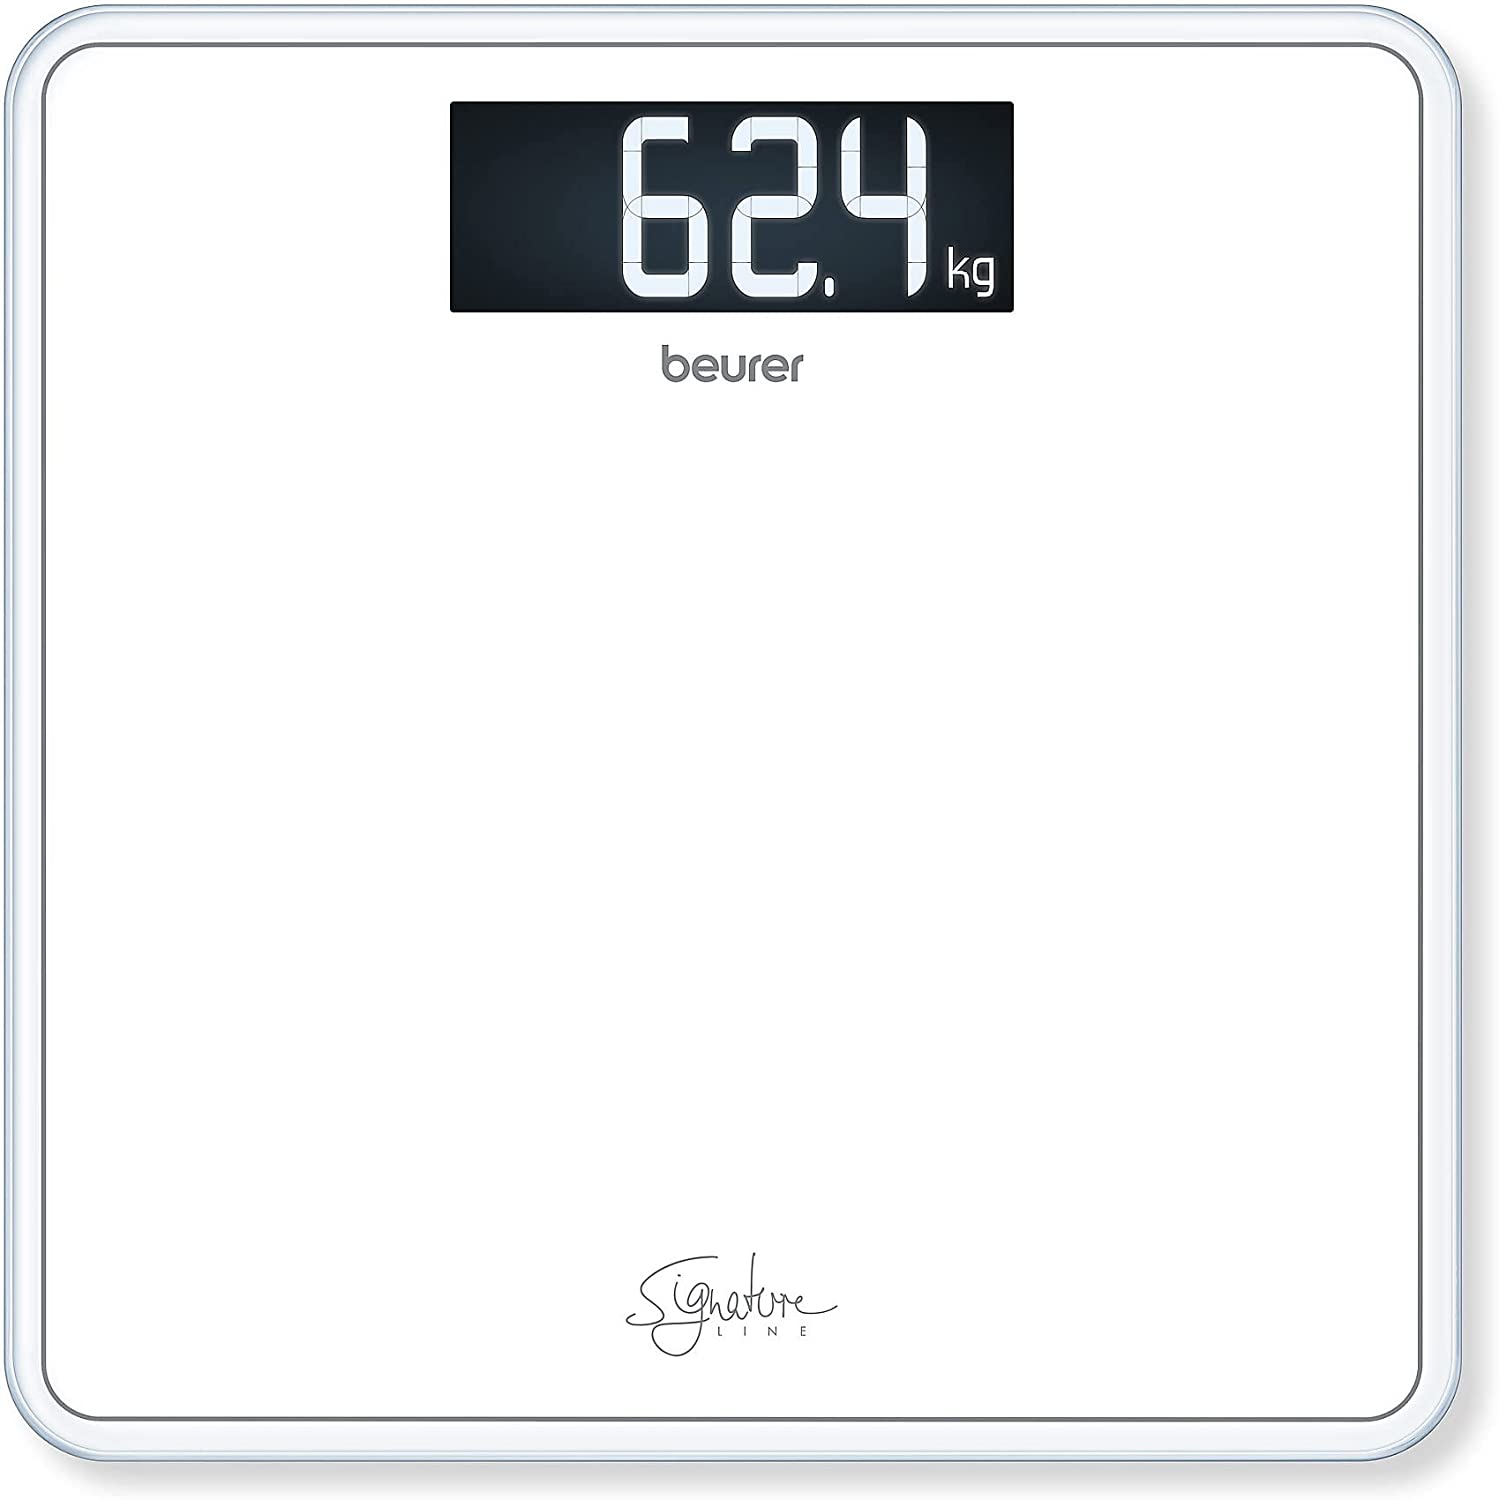 Beurer GS 400 White Signature Line Glass / Bathroom Scales with Large Tread Surface Made of Super White Safety Glass, Stylish Black Display in XL Format and Load Capacity up to 200 kg